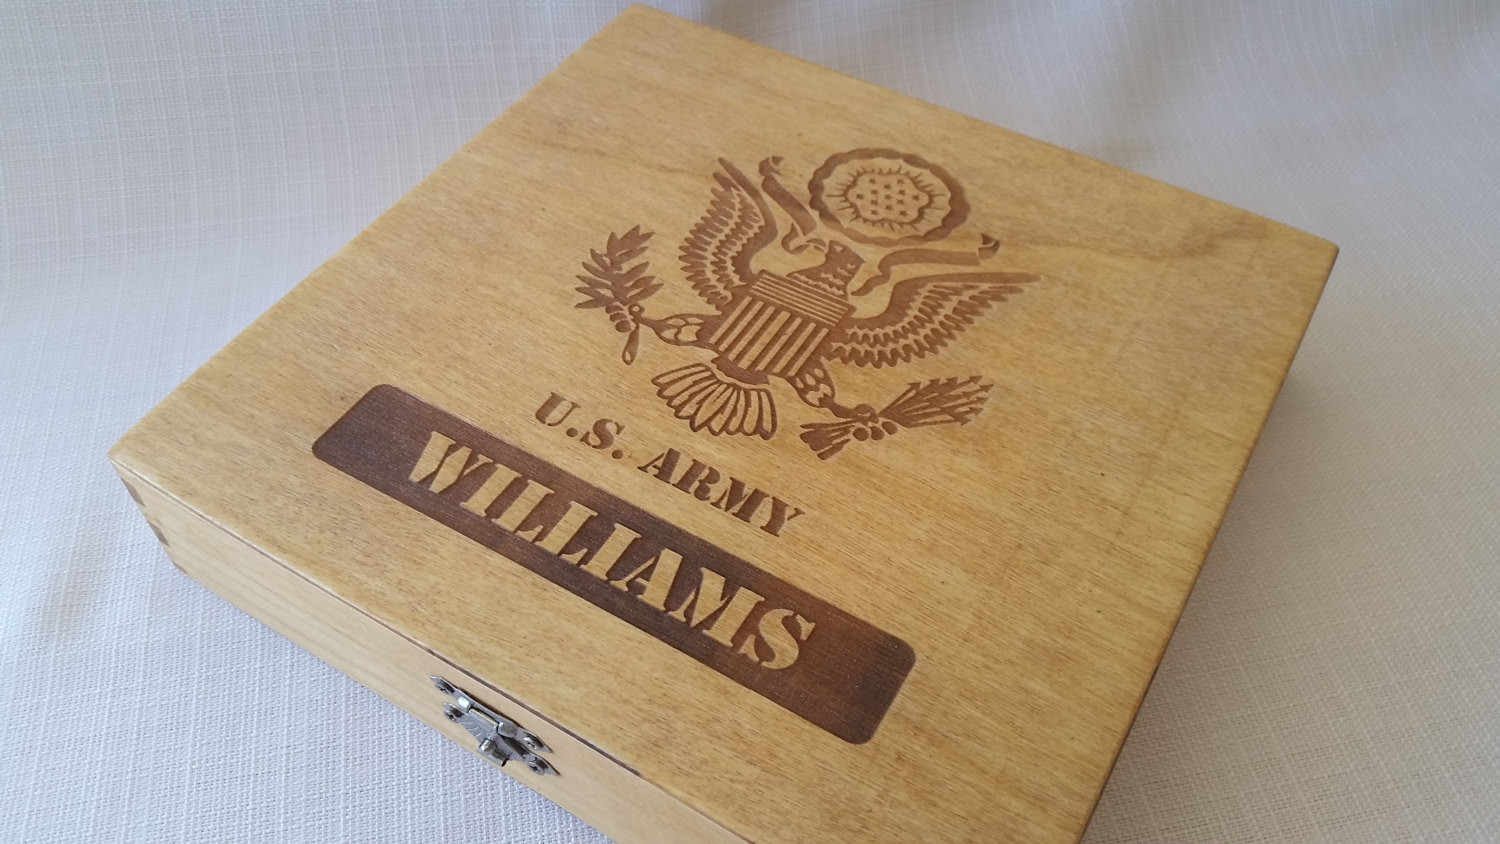 Graduation Gift Ideas For Army Boot Camp
 Personalized US Army Keepsake Box Boot camp graduation t